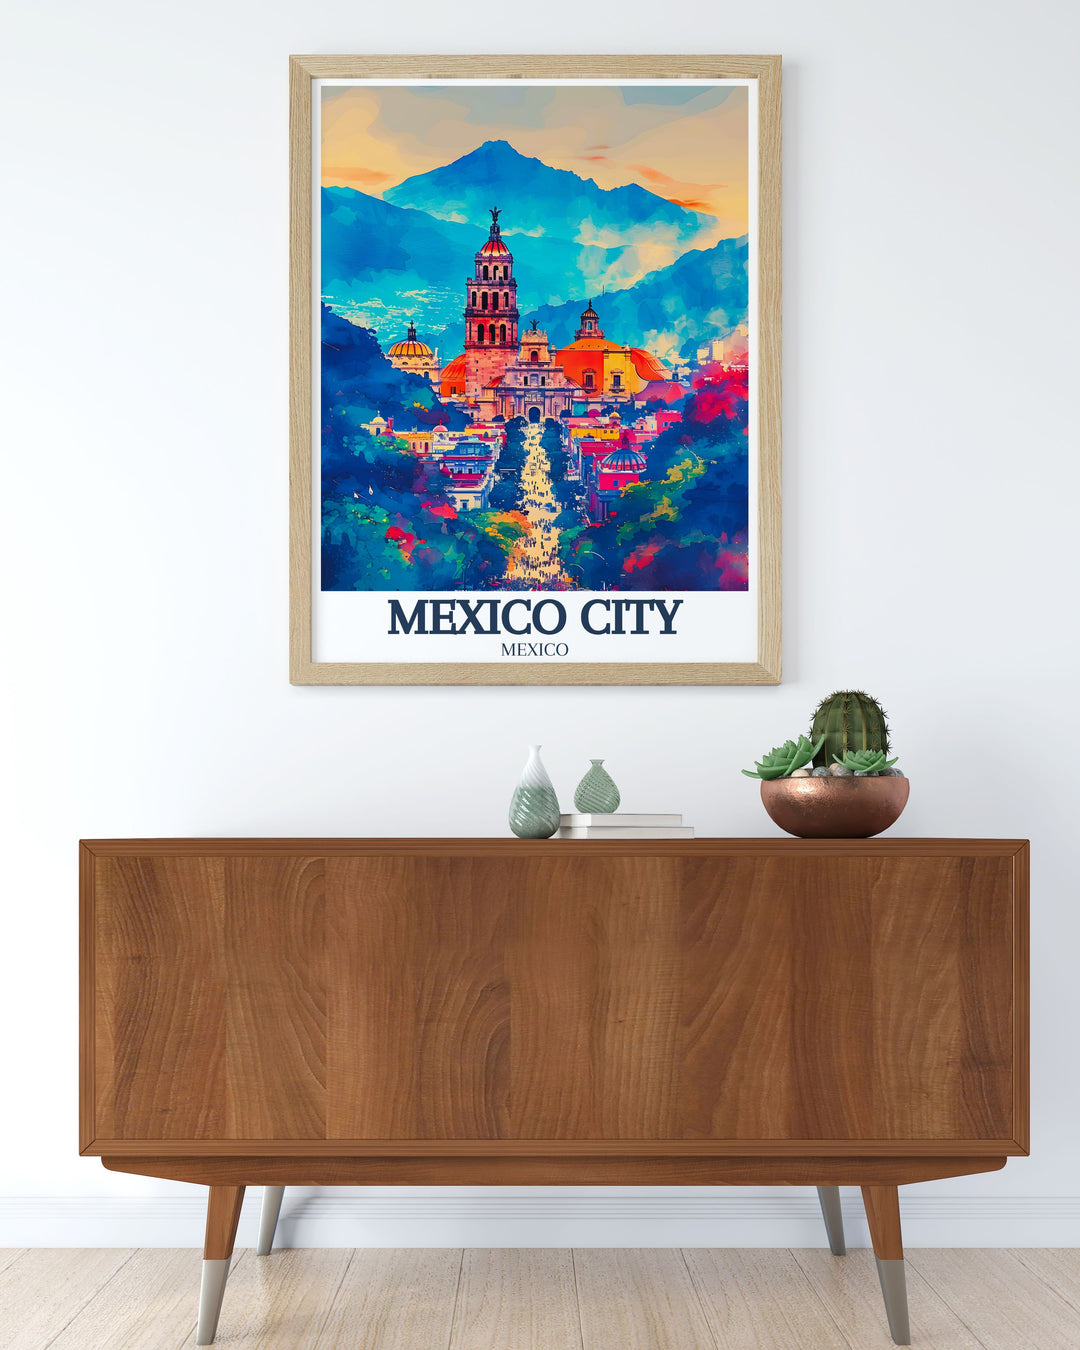 Mexico City decor featuring Metropolitan cathedral Zocalo Chapultepec castle. This vintage print adds a touch of elegance and historical charm to any room making it a standout piece in any collection of Mexico artwork.